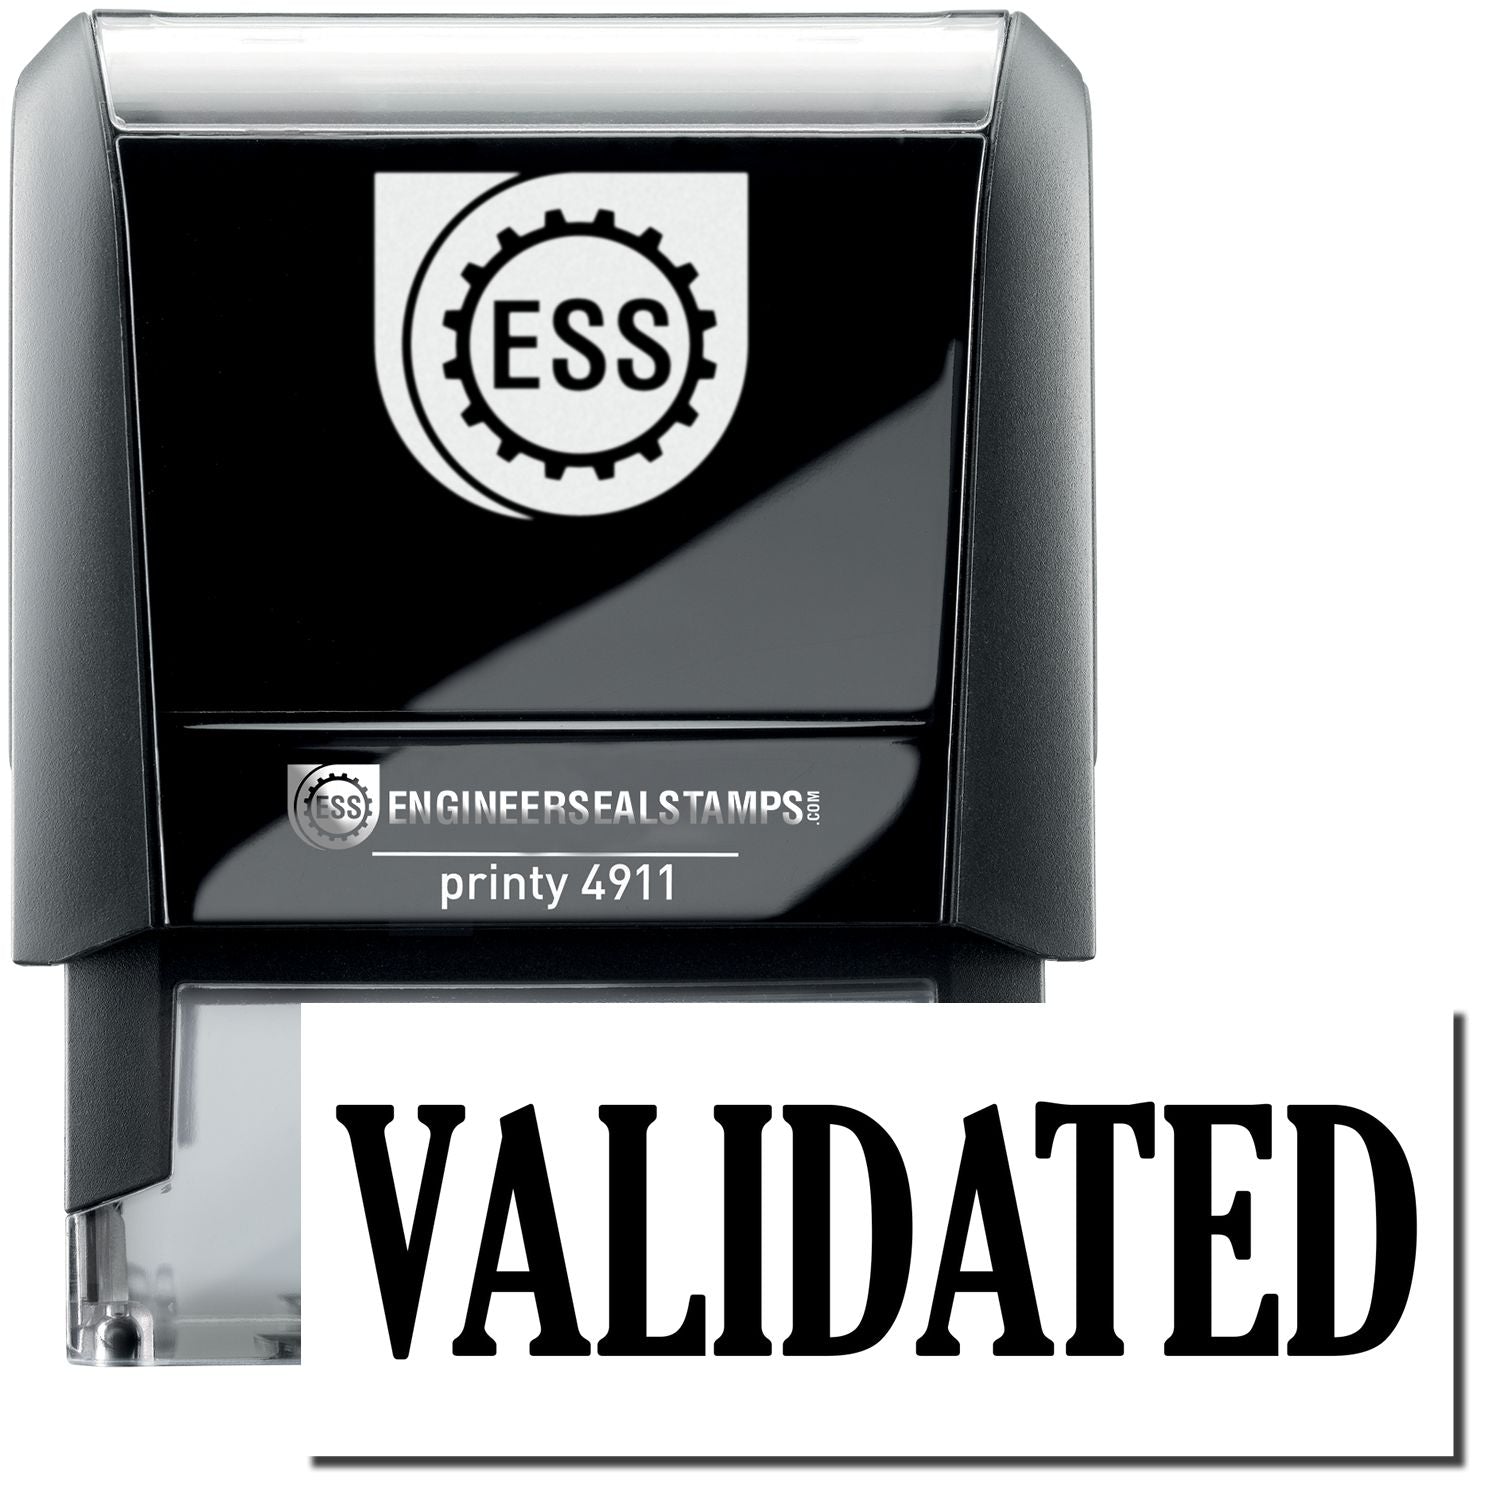 A self-inking stamp with a stamped image showing how the text "VALIDATED" is displayed after stamping.